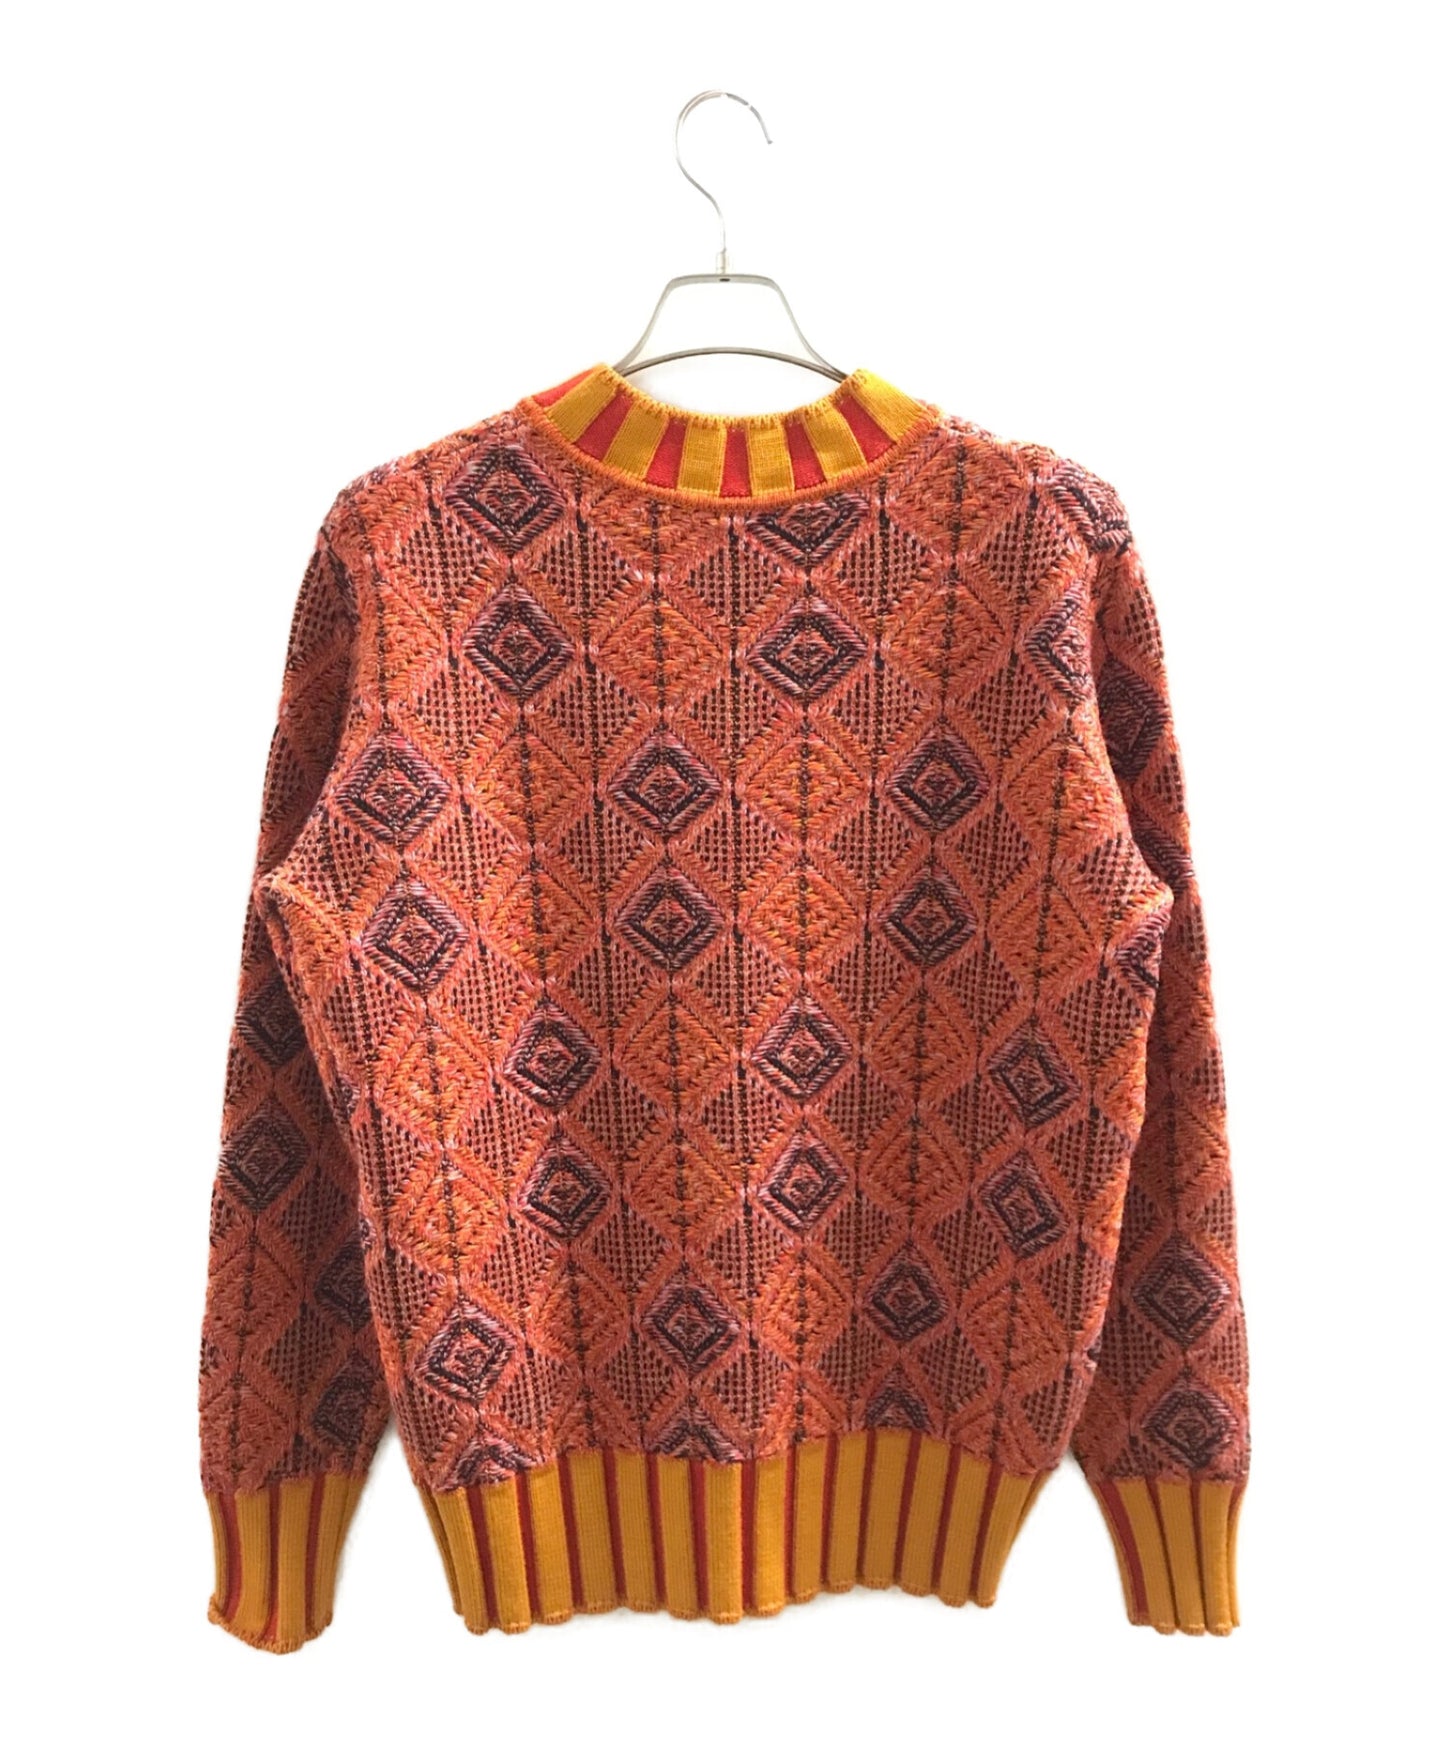 Vivienne Westwood man Knit with orb embroidery VI-V9*-79101